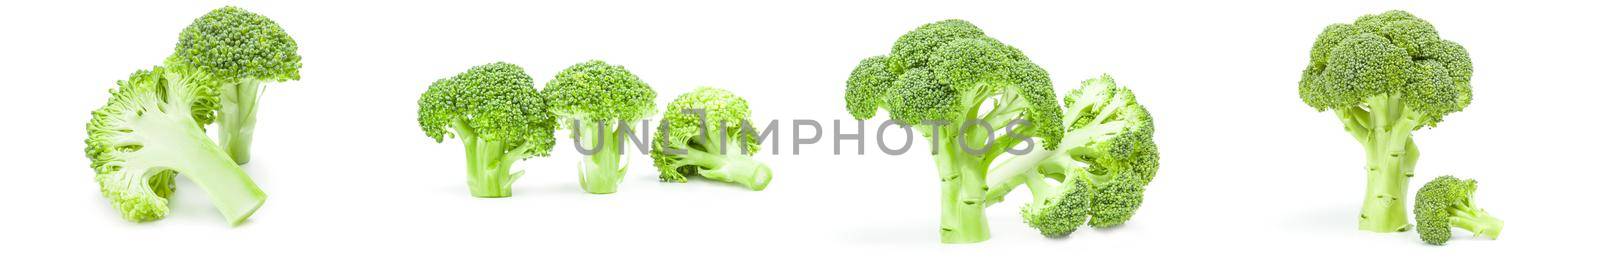 Collection of fresh head of broccoli isolated on a white background